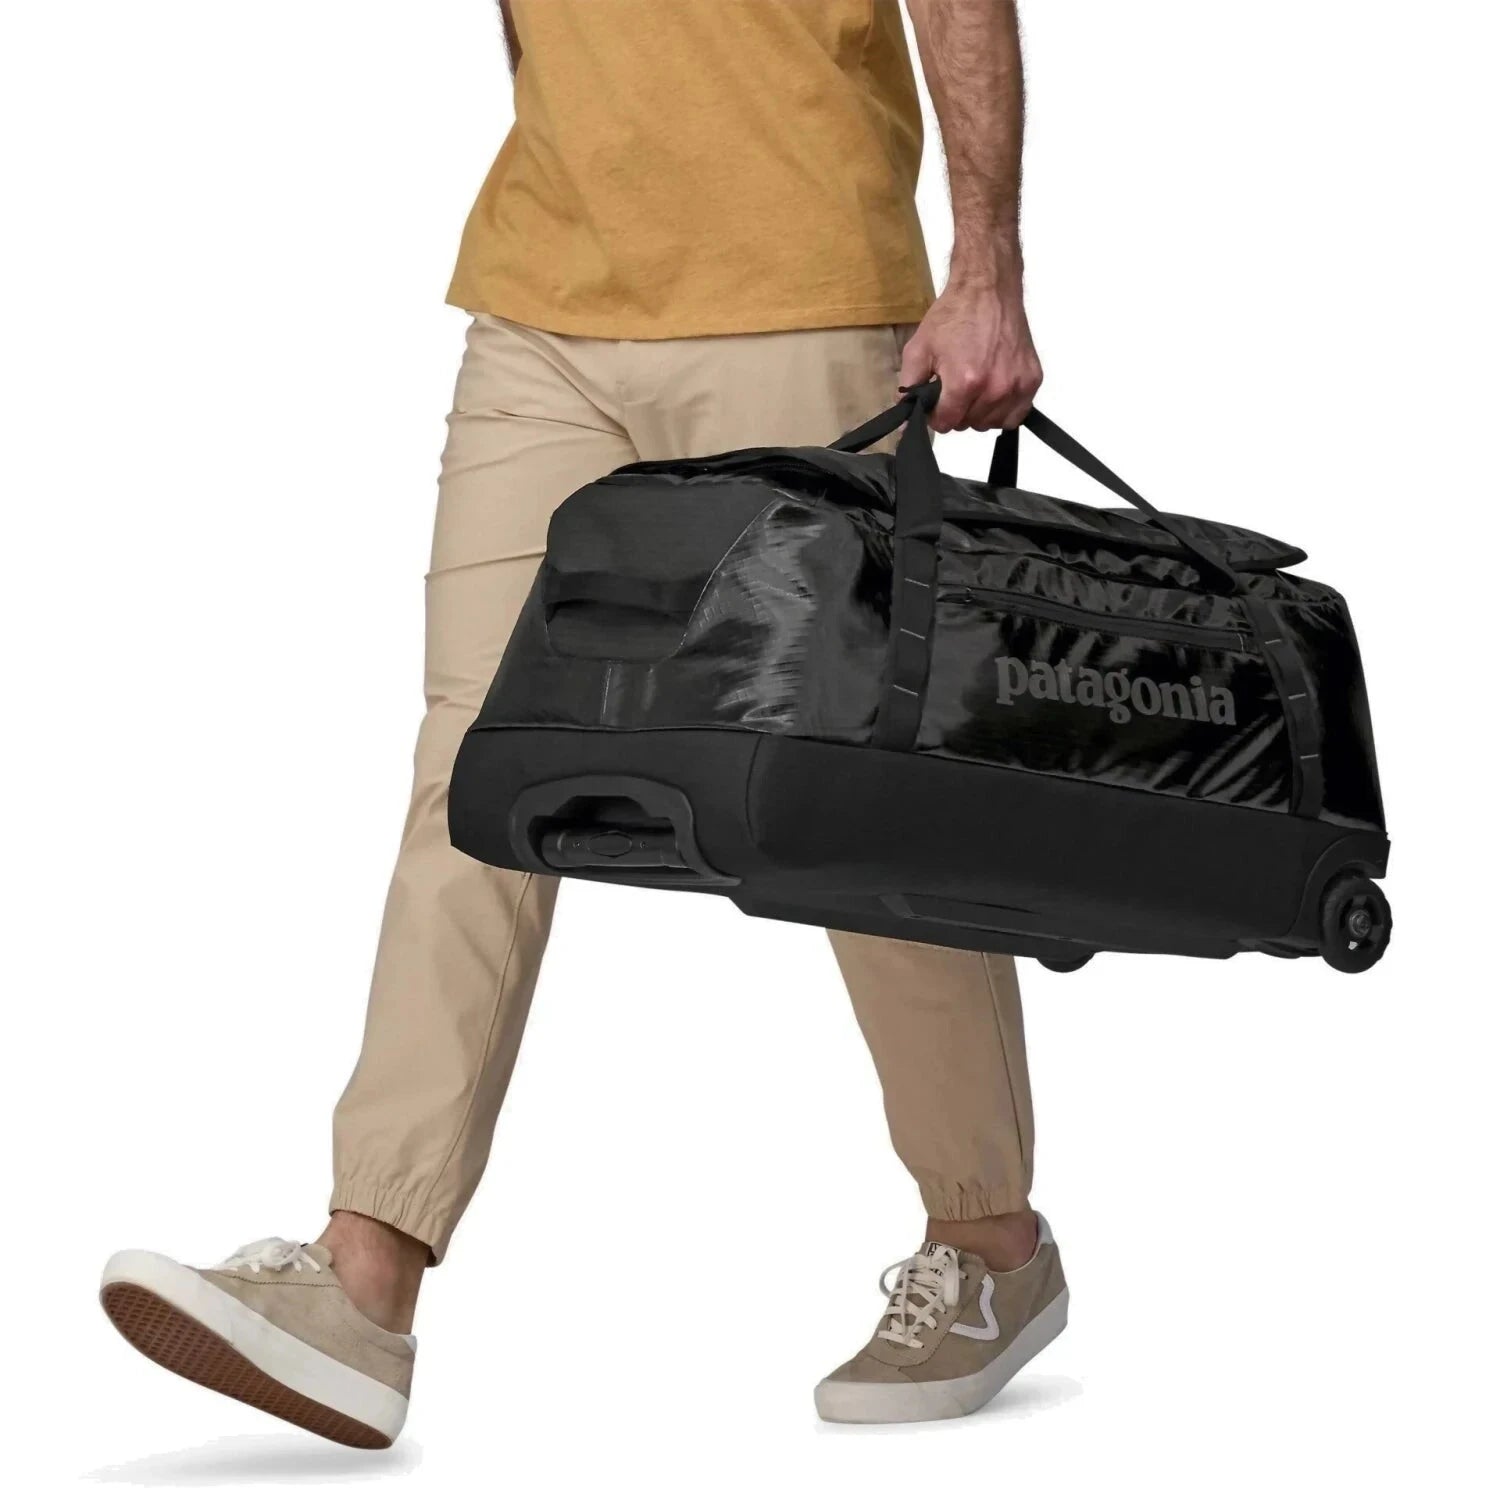 Patagonia Black Hole® Wheeled Duffel Bag 70L, Black, front and side view of model holding bag 